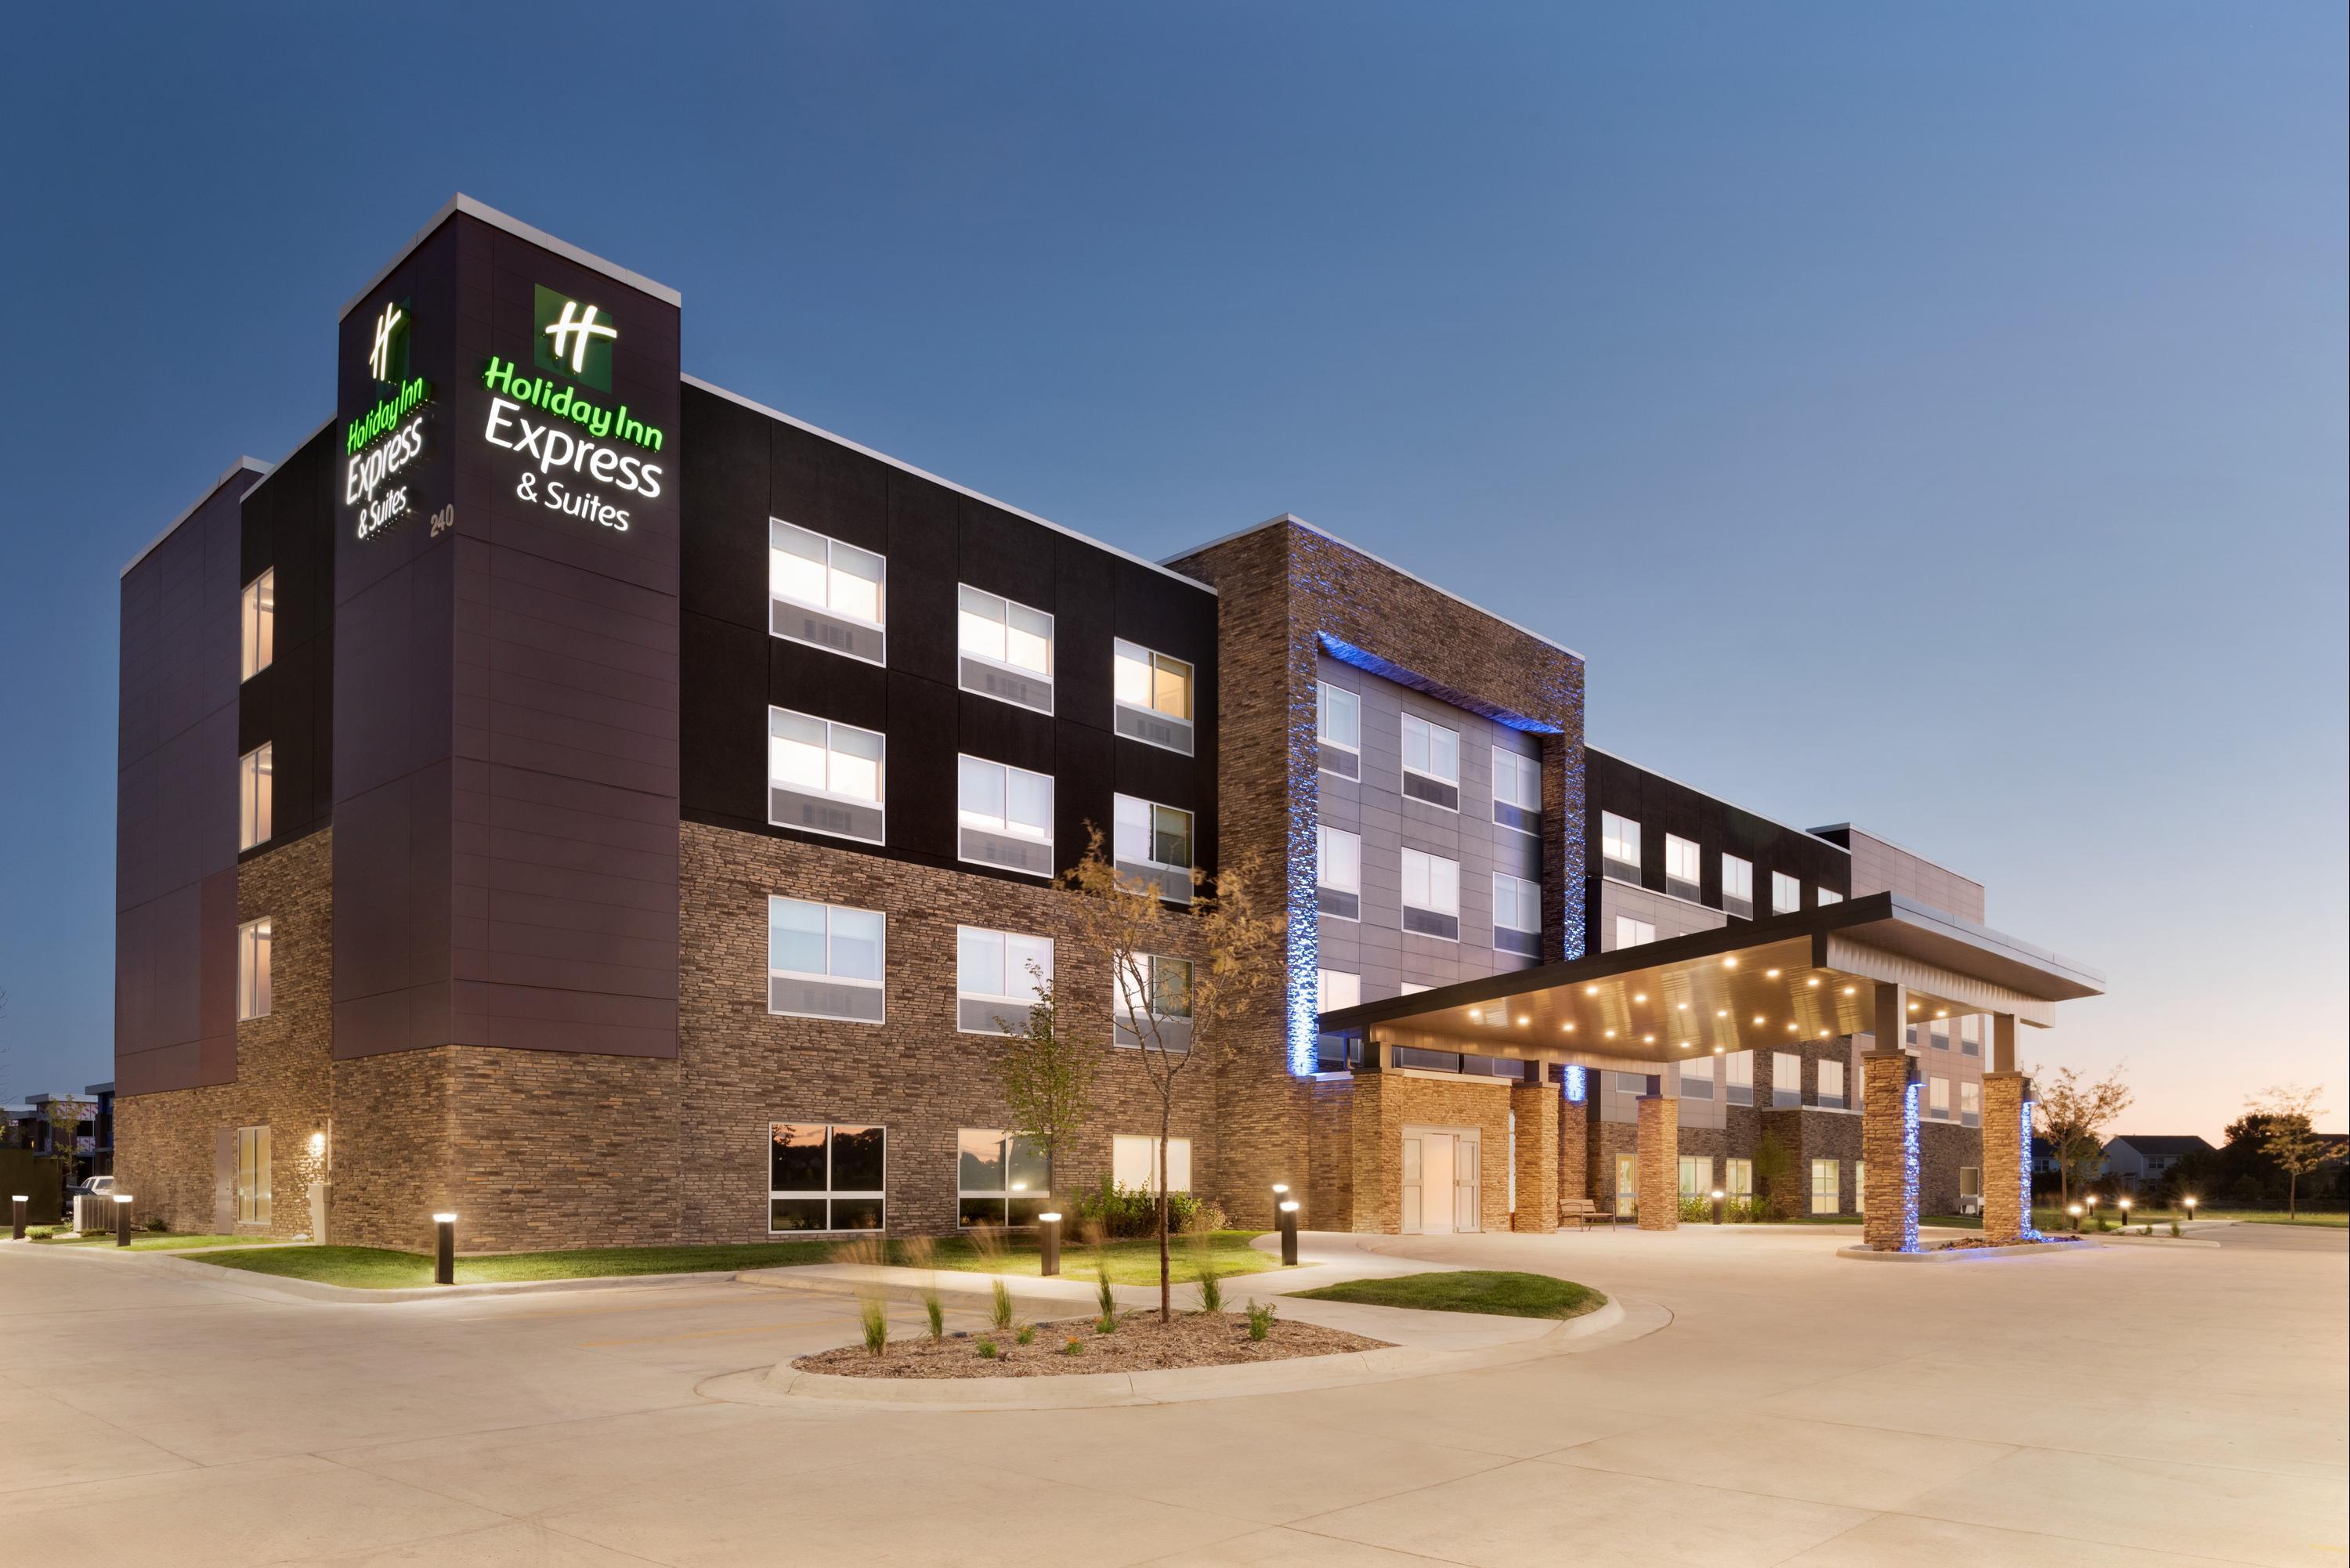 Sheraton West Des Moines Hotel from $101. West Des Moines Hotel Deals &  Reviews - KAYAK